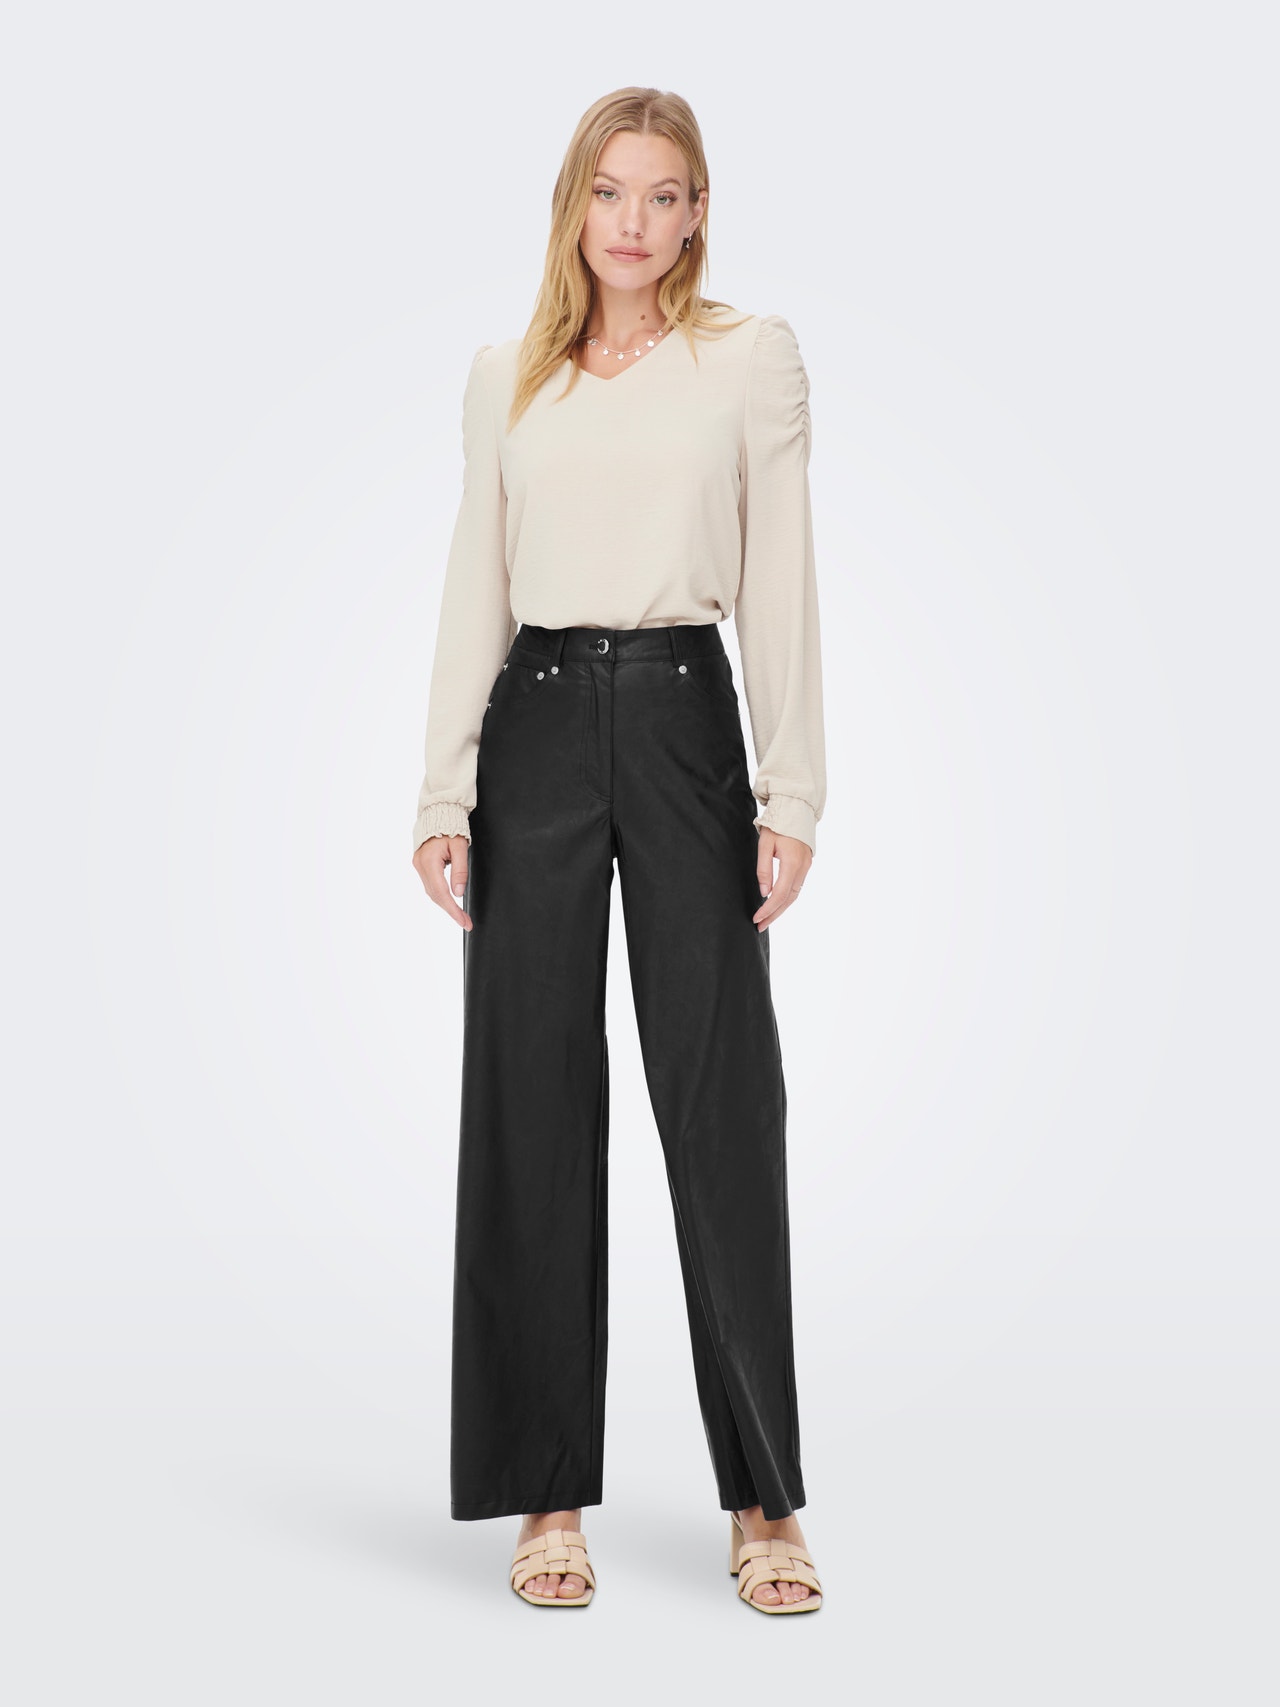 ONLY Regular Fit Trousers -Black - 15264688